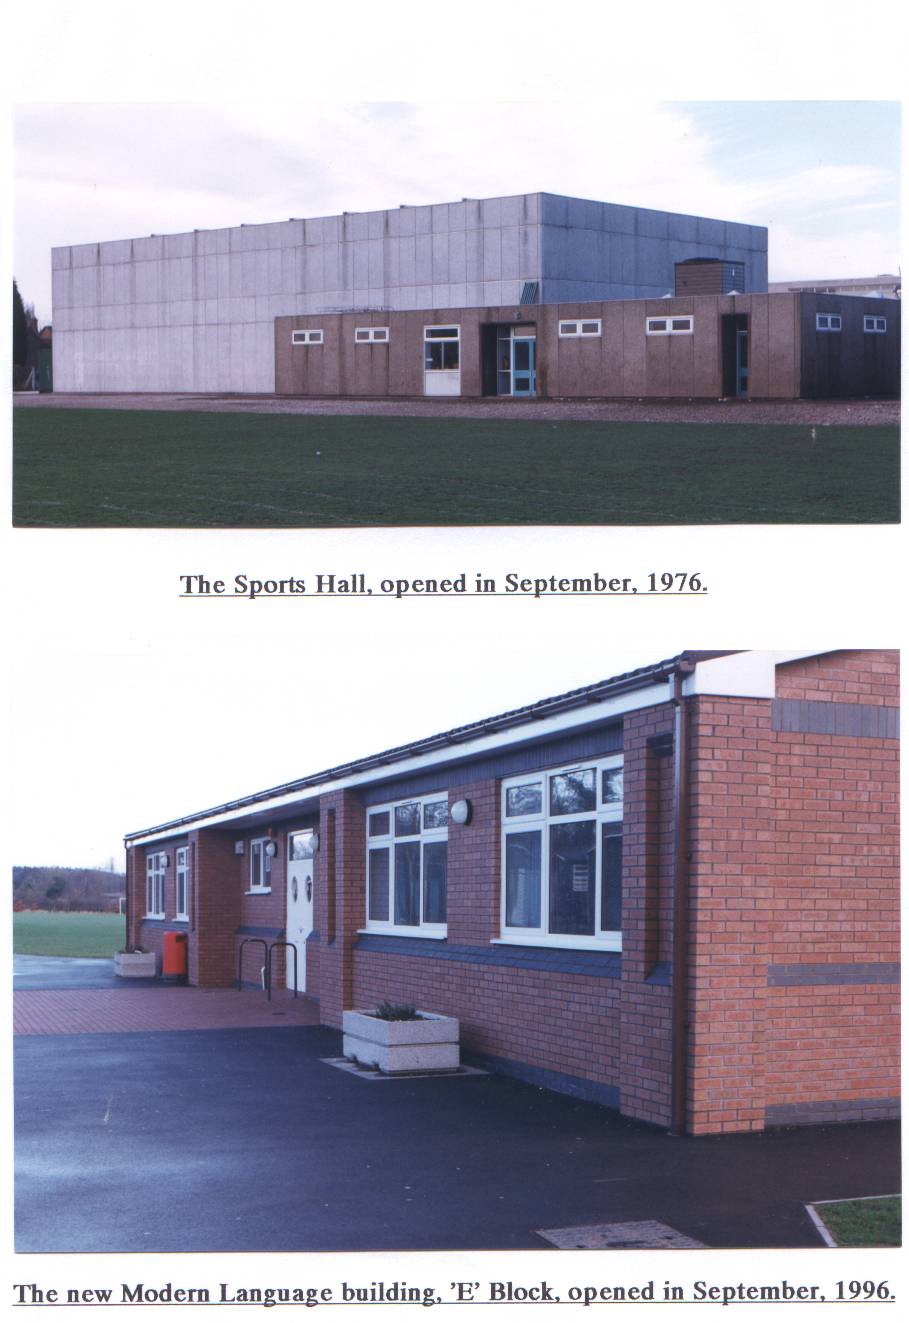 The Sports Hall, opened in September, 1976. The new Modern Language building, 'E' Block, opened in September, 1996.